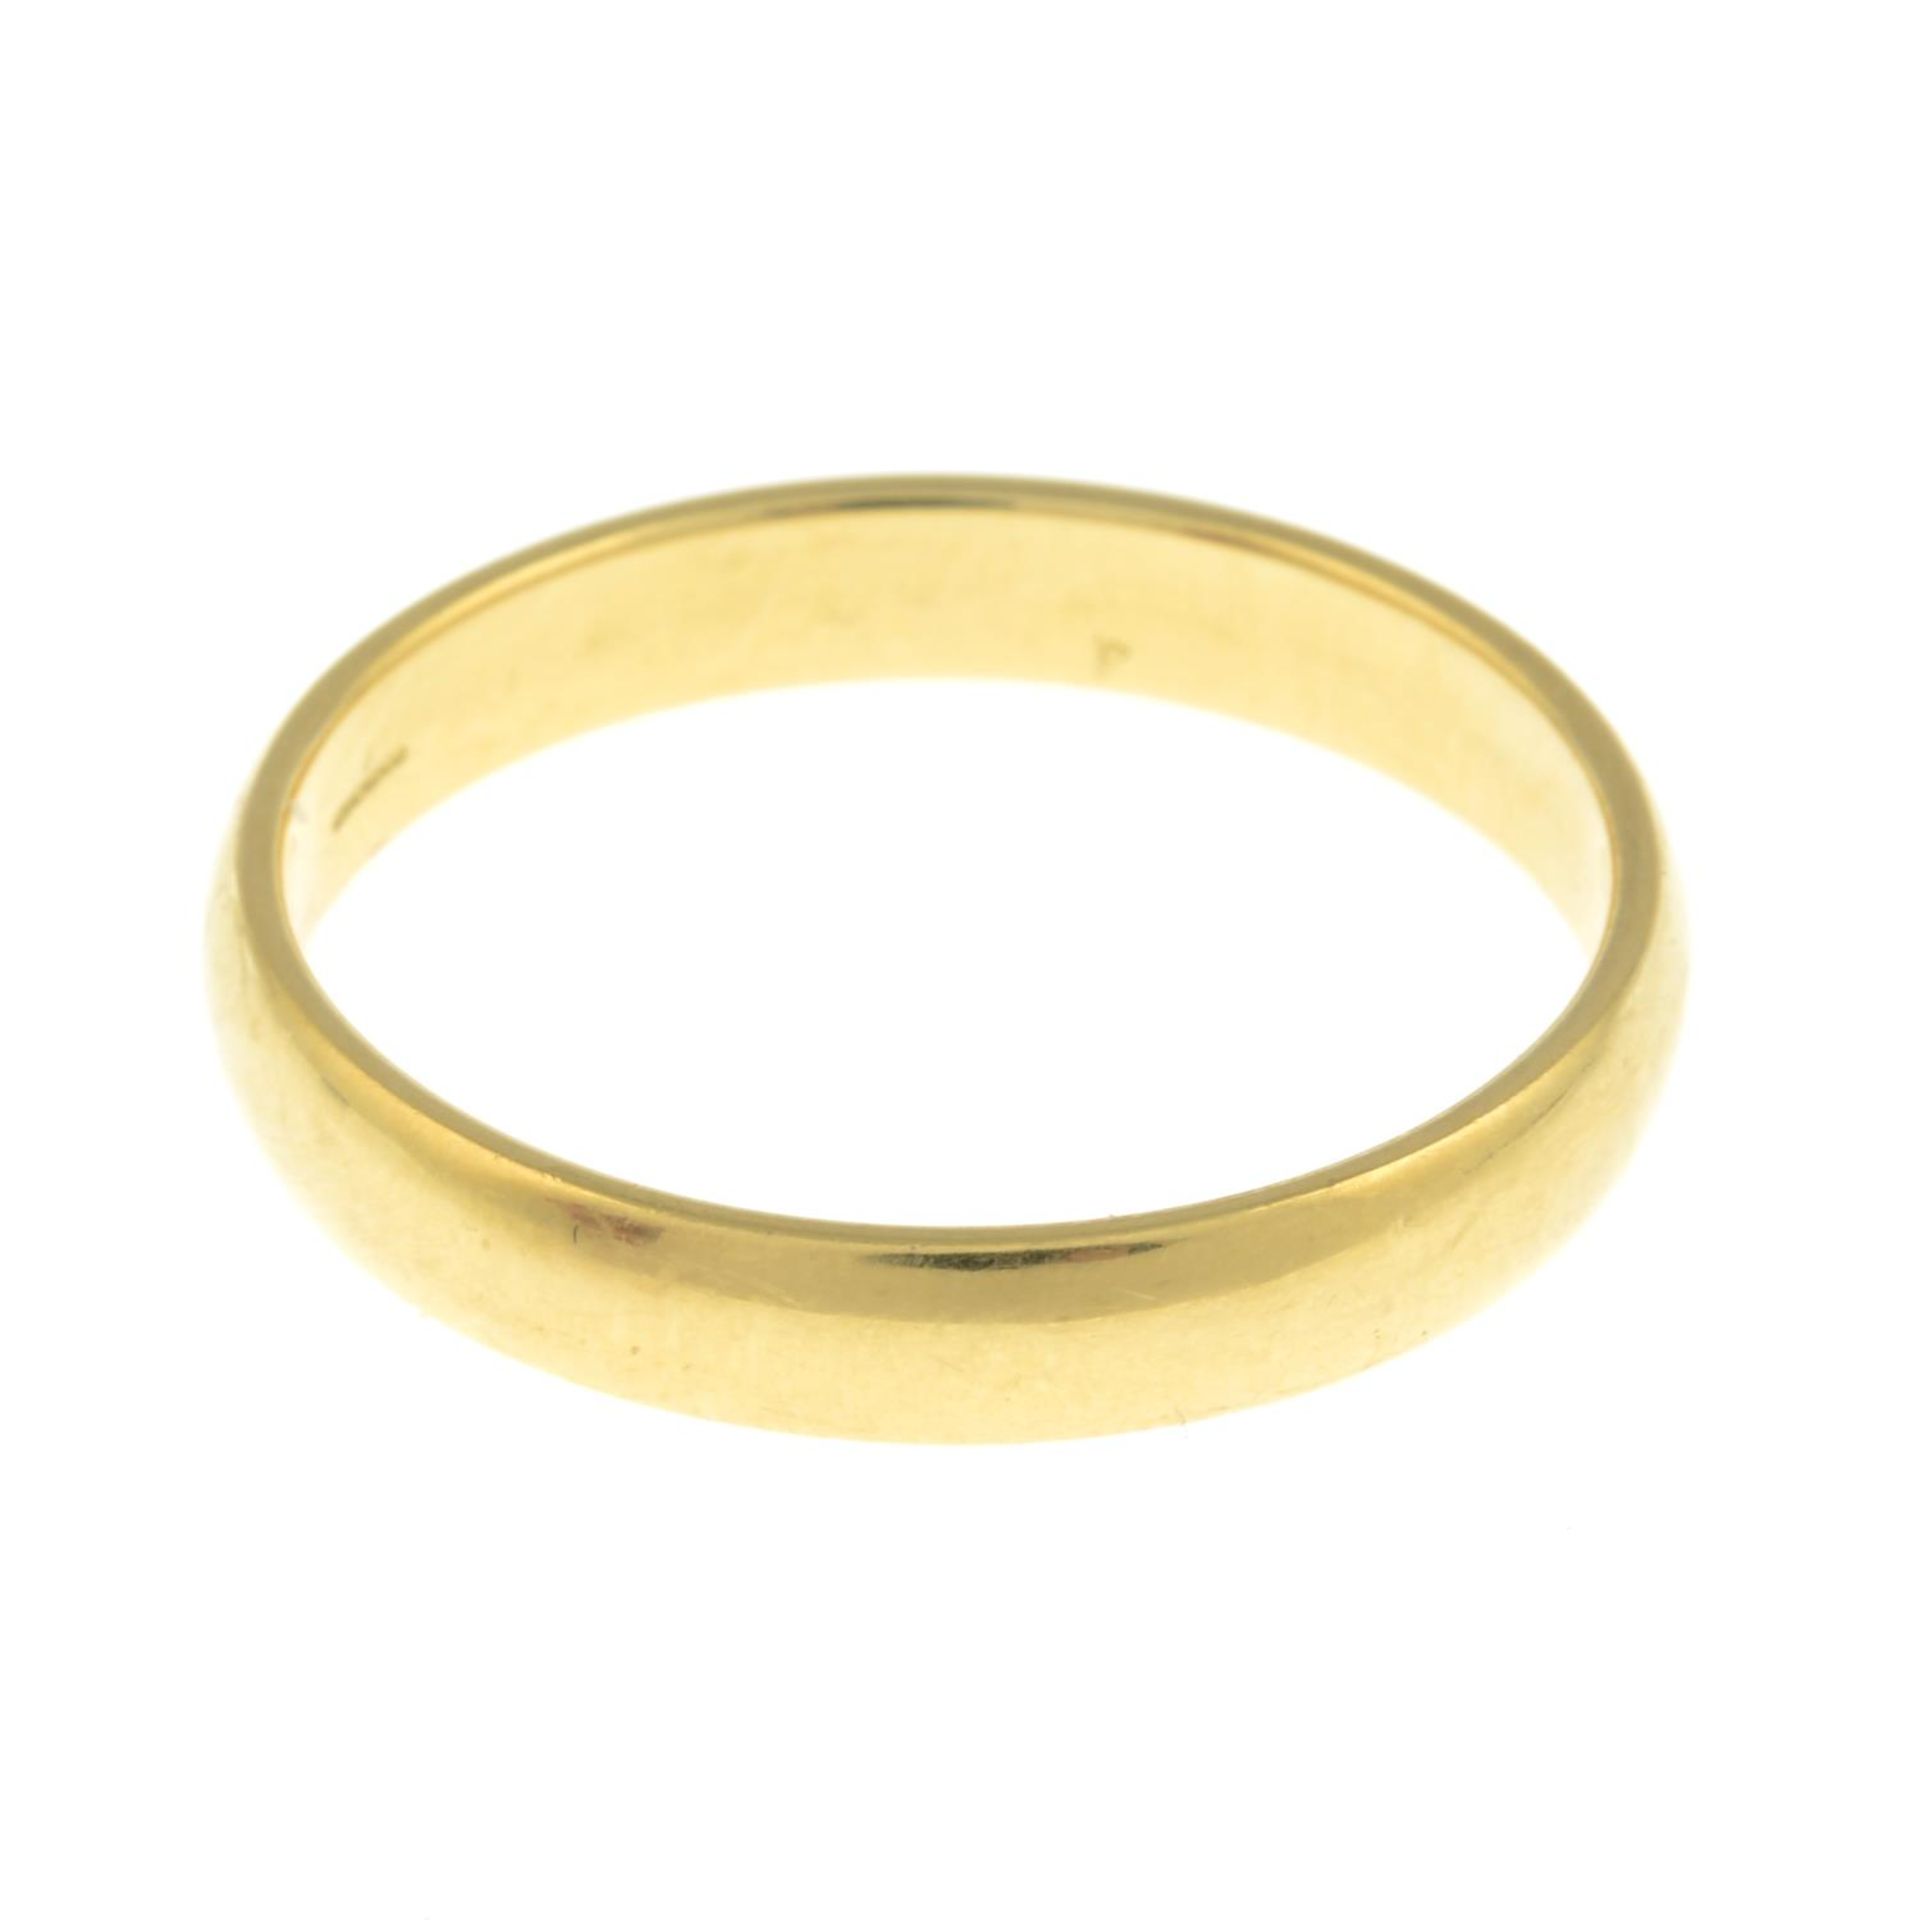 TIFFANY & CO. - an 18ct gold band ring. - Image 2 of 3